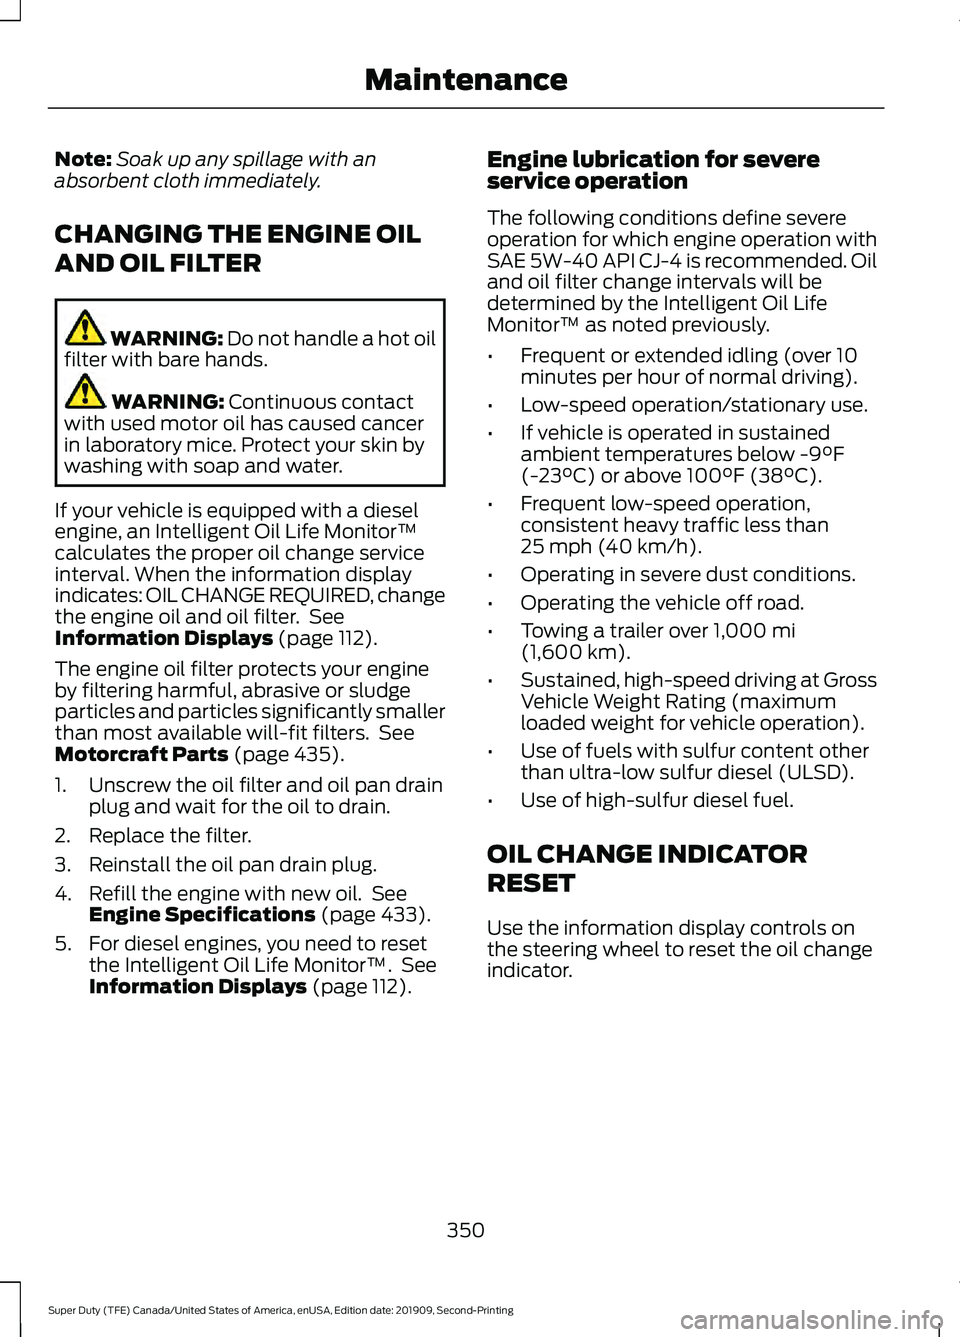 FORD F250 SUPER DUTY 2020  Owners Manual Note:
Soak up any spillage with an
absorbent cloth immediately.
CHANGING THE ENGINE OIL
AND OIL FILTER WARNING: Do not handle a hot oil
filter with bare hands. WARNING: Continuous contact
with used mo